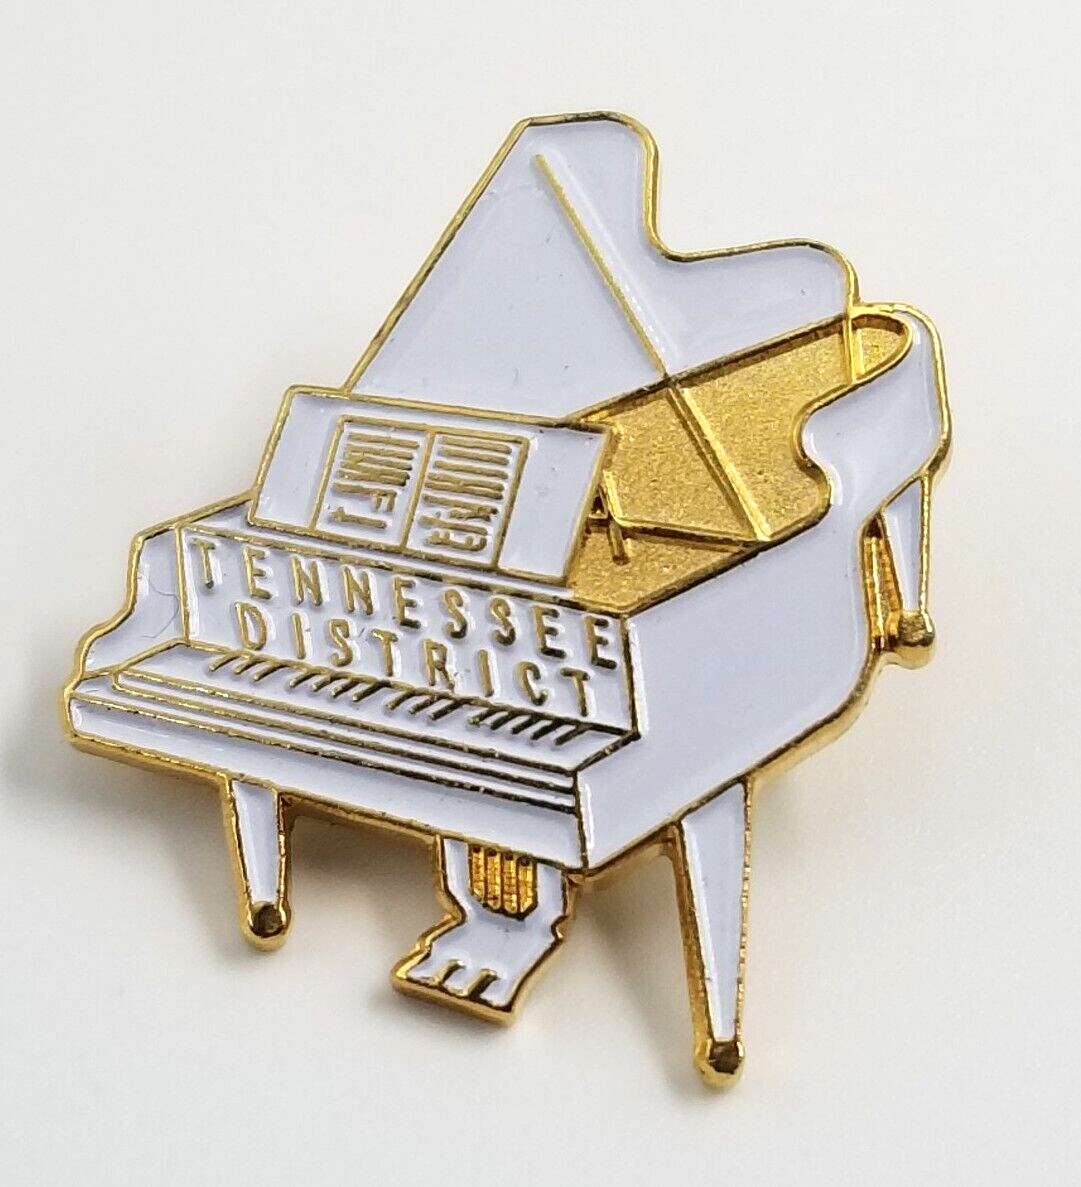 Primary image for USPS Tennessee District US Postal Service Grand Piano Gold Tone White Enamel Pin